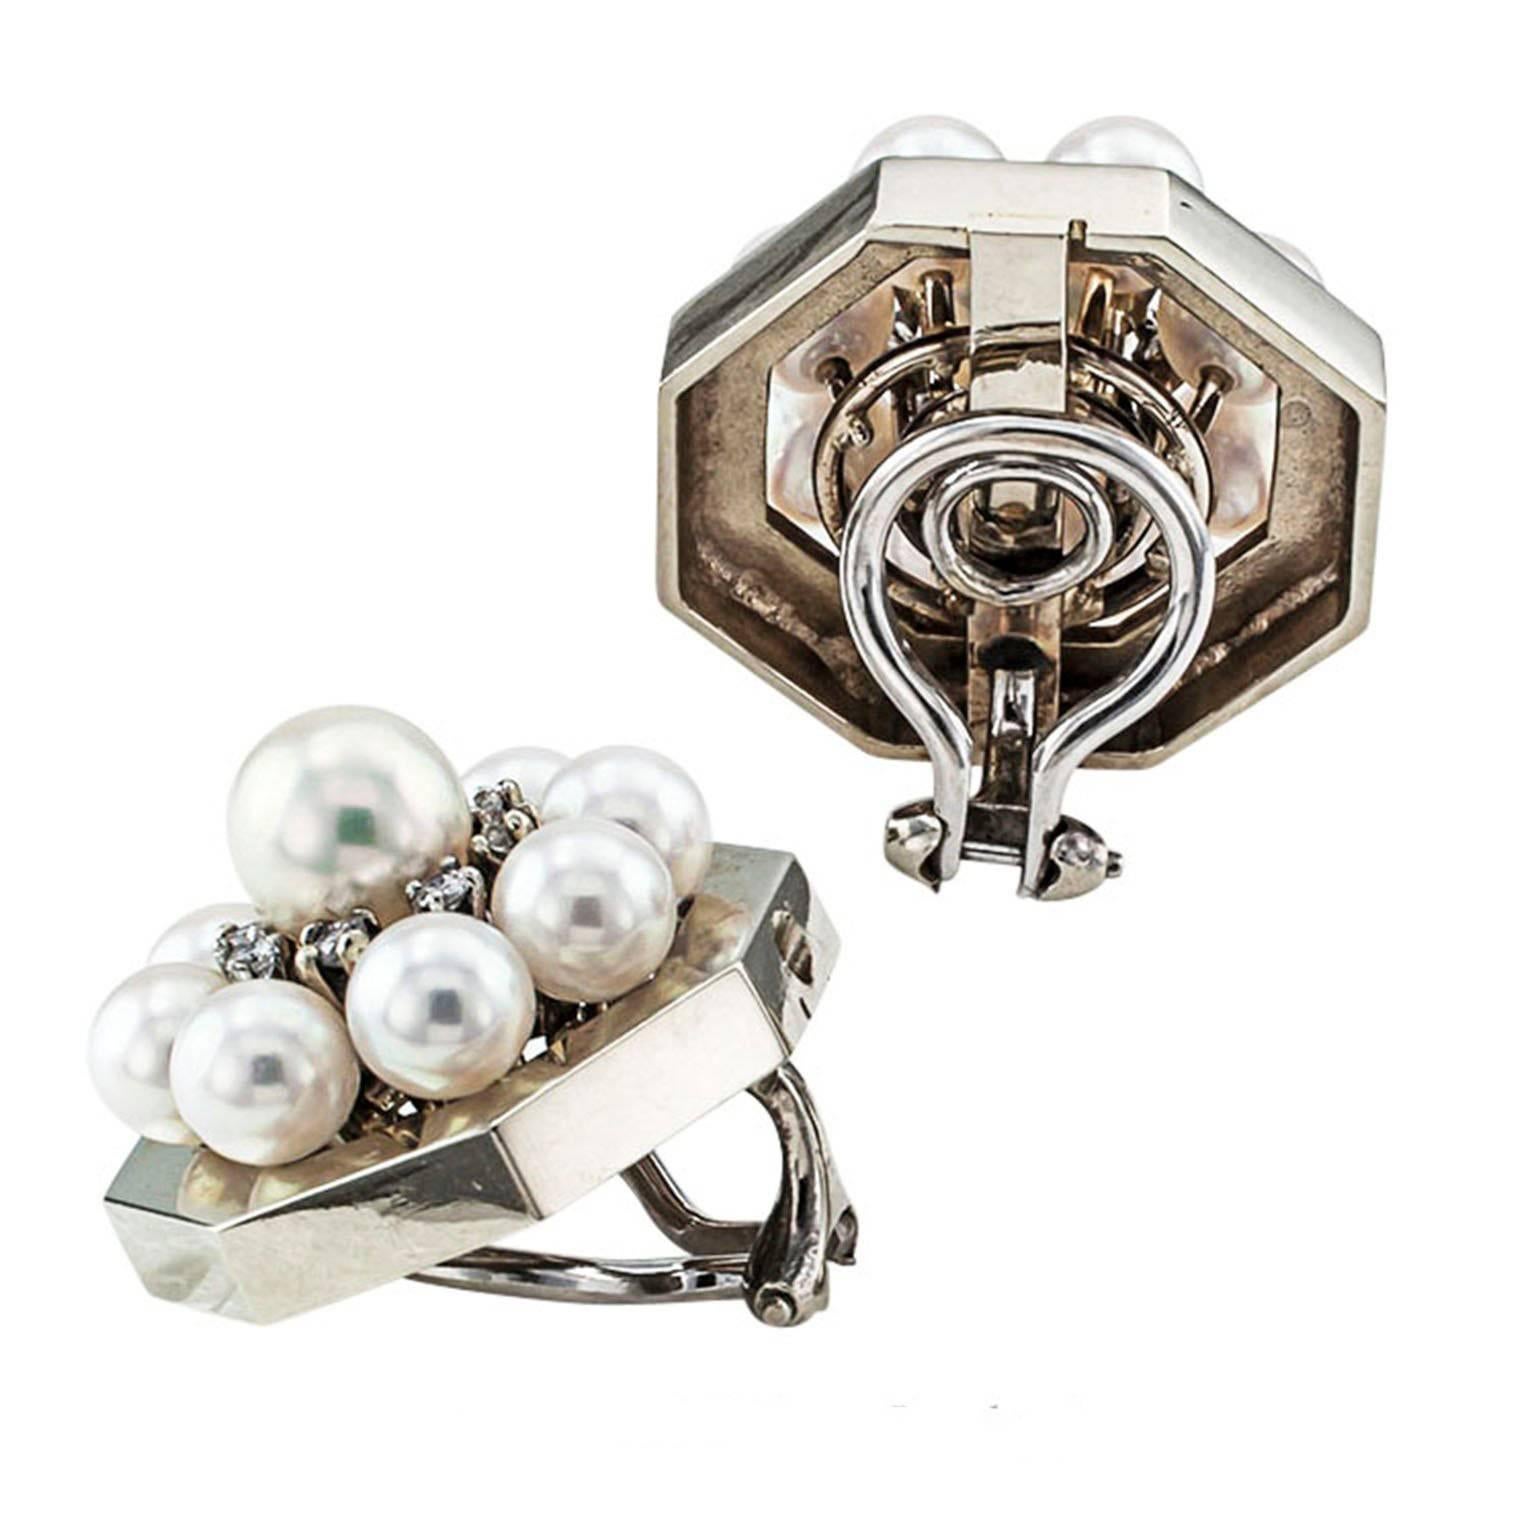 Mid-Century Cultured Pearl and Diamond Octagonal Earrings

The classic octagonal earring design gloriously elevated by a circular motif centering upon a 7 mm cultured pearl ringed by a course of prong-set diamonds framed by 5 mm cultured pearls. 